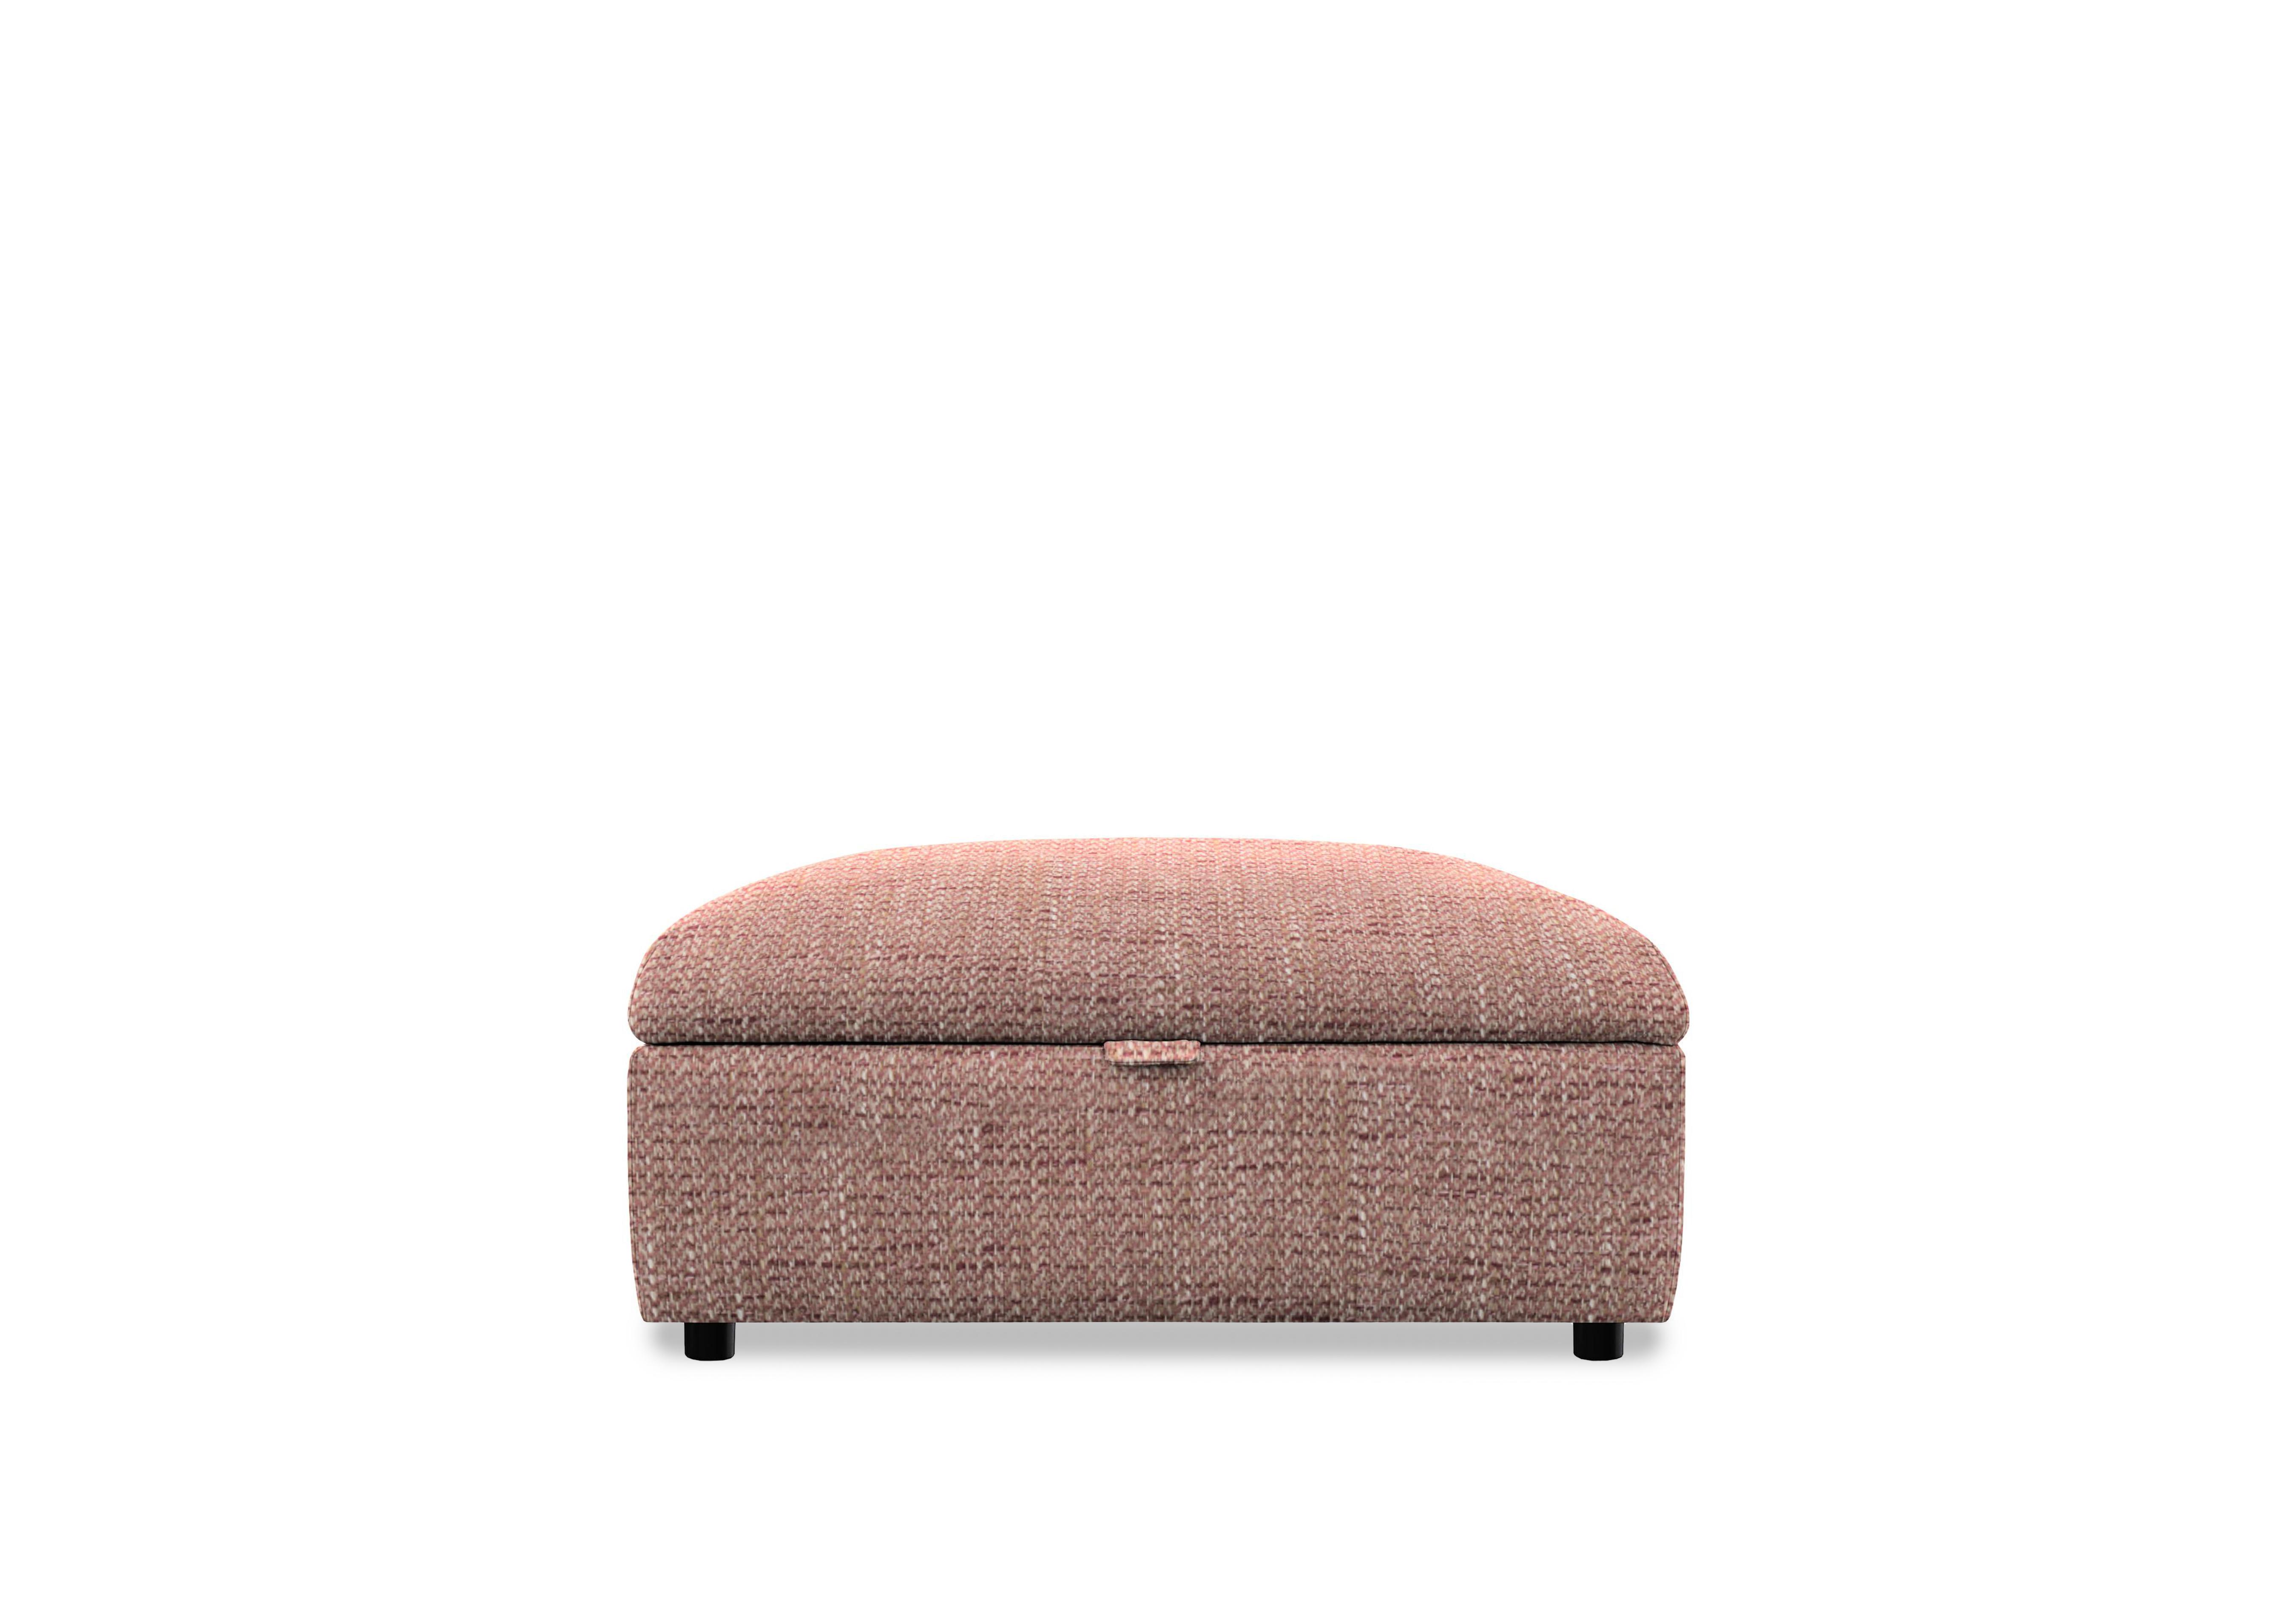 Hudson 23 Fabric Storage Stool in Country Rose 001409-0003 on Furniture Village